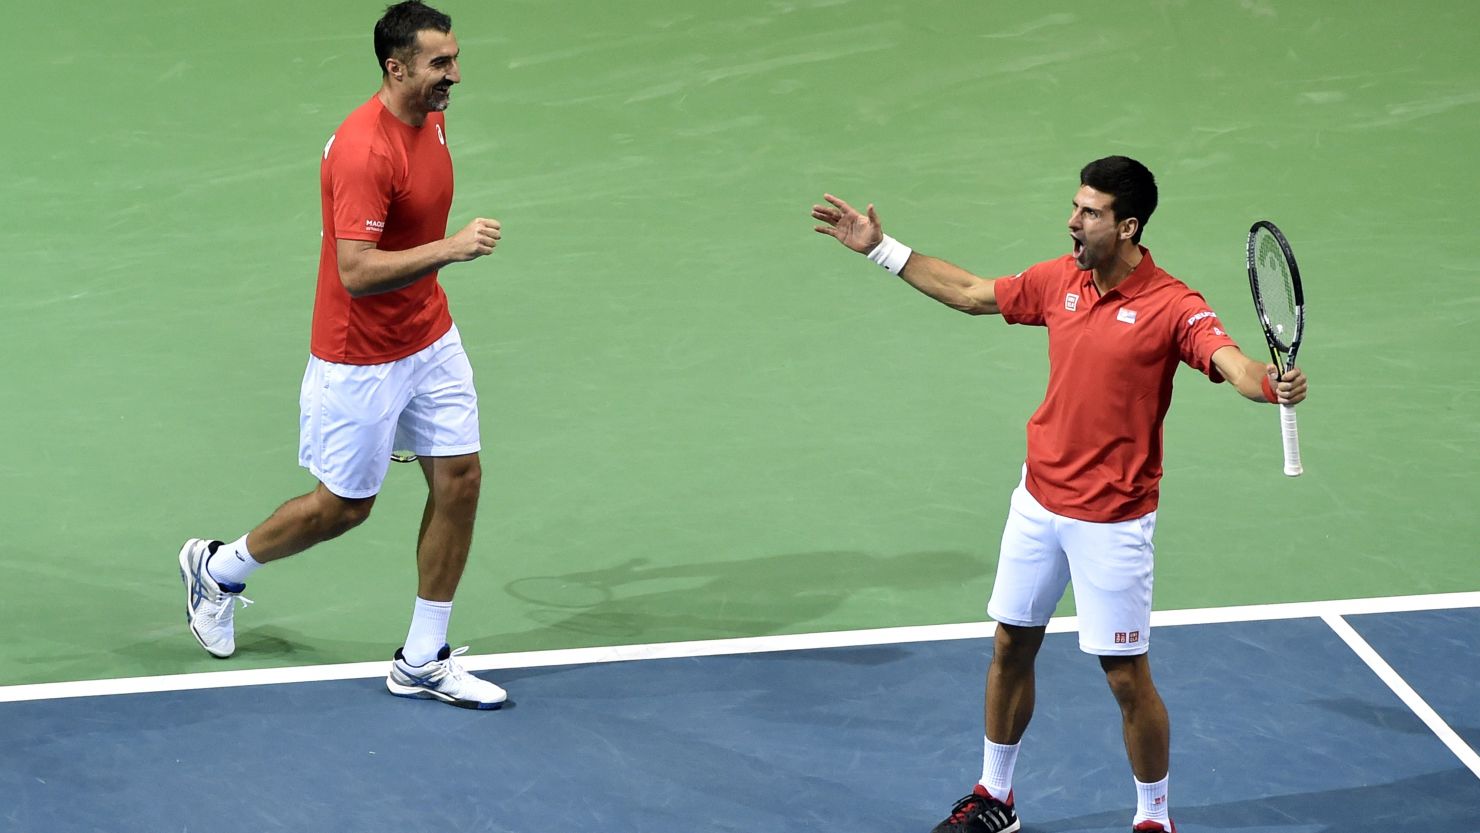 Novak Djokovic (right) and Nenad Zimonjic celebrate after gaining a point against Croatia's Marin Draganja and Franko Skugor during their Davis Cup match.